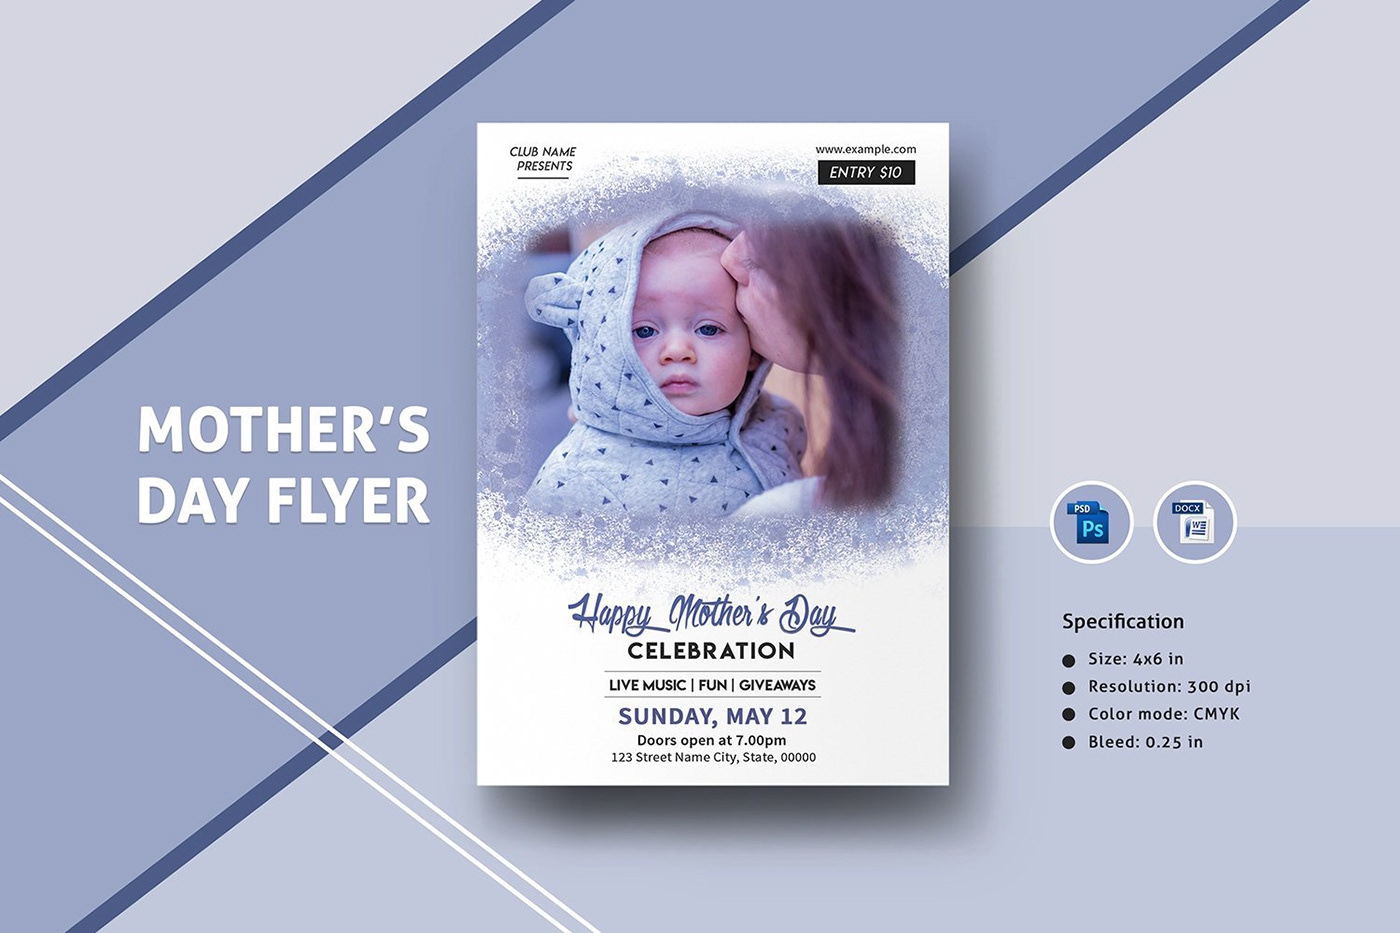 mothers day photoshop template flyer template Invitation Flyer happy mother's day party flyer Mother's Day Flyer Flyer Design MS Word template mothers day 2019